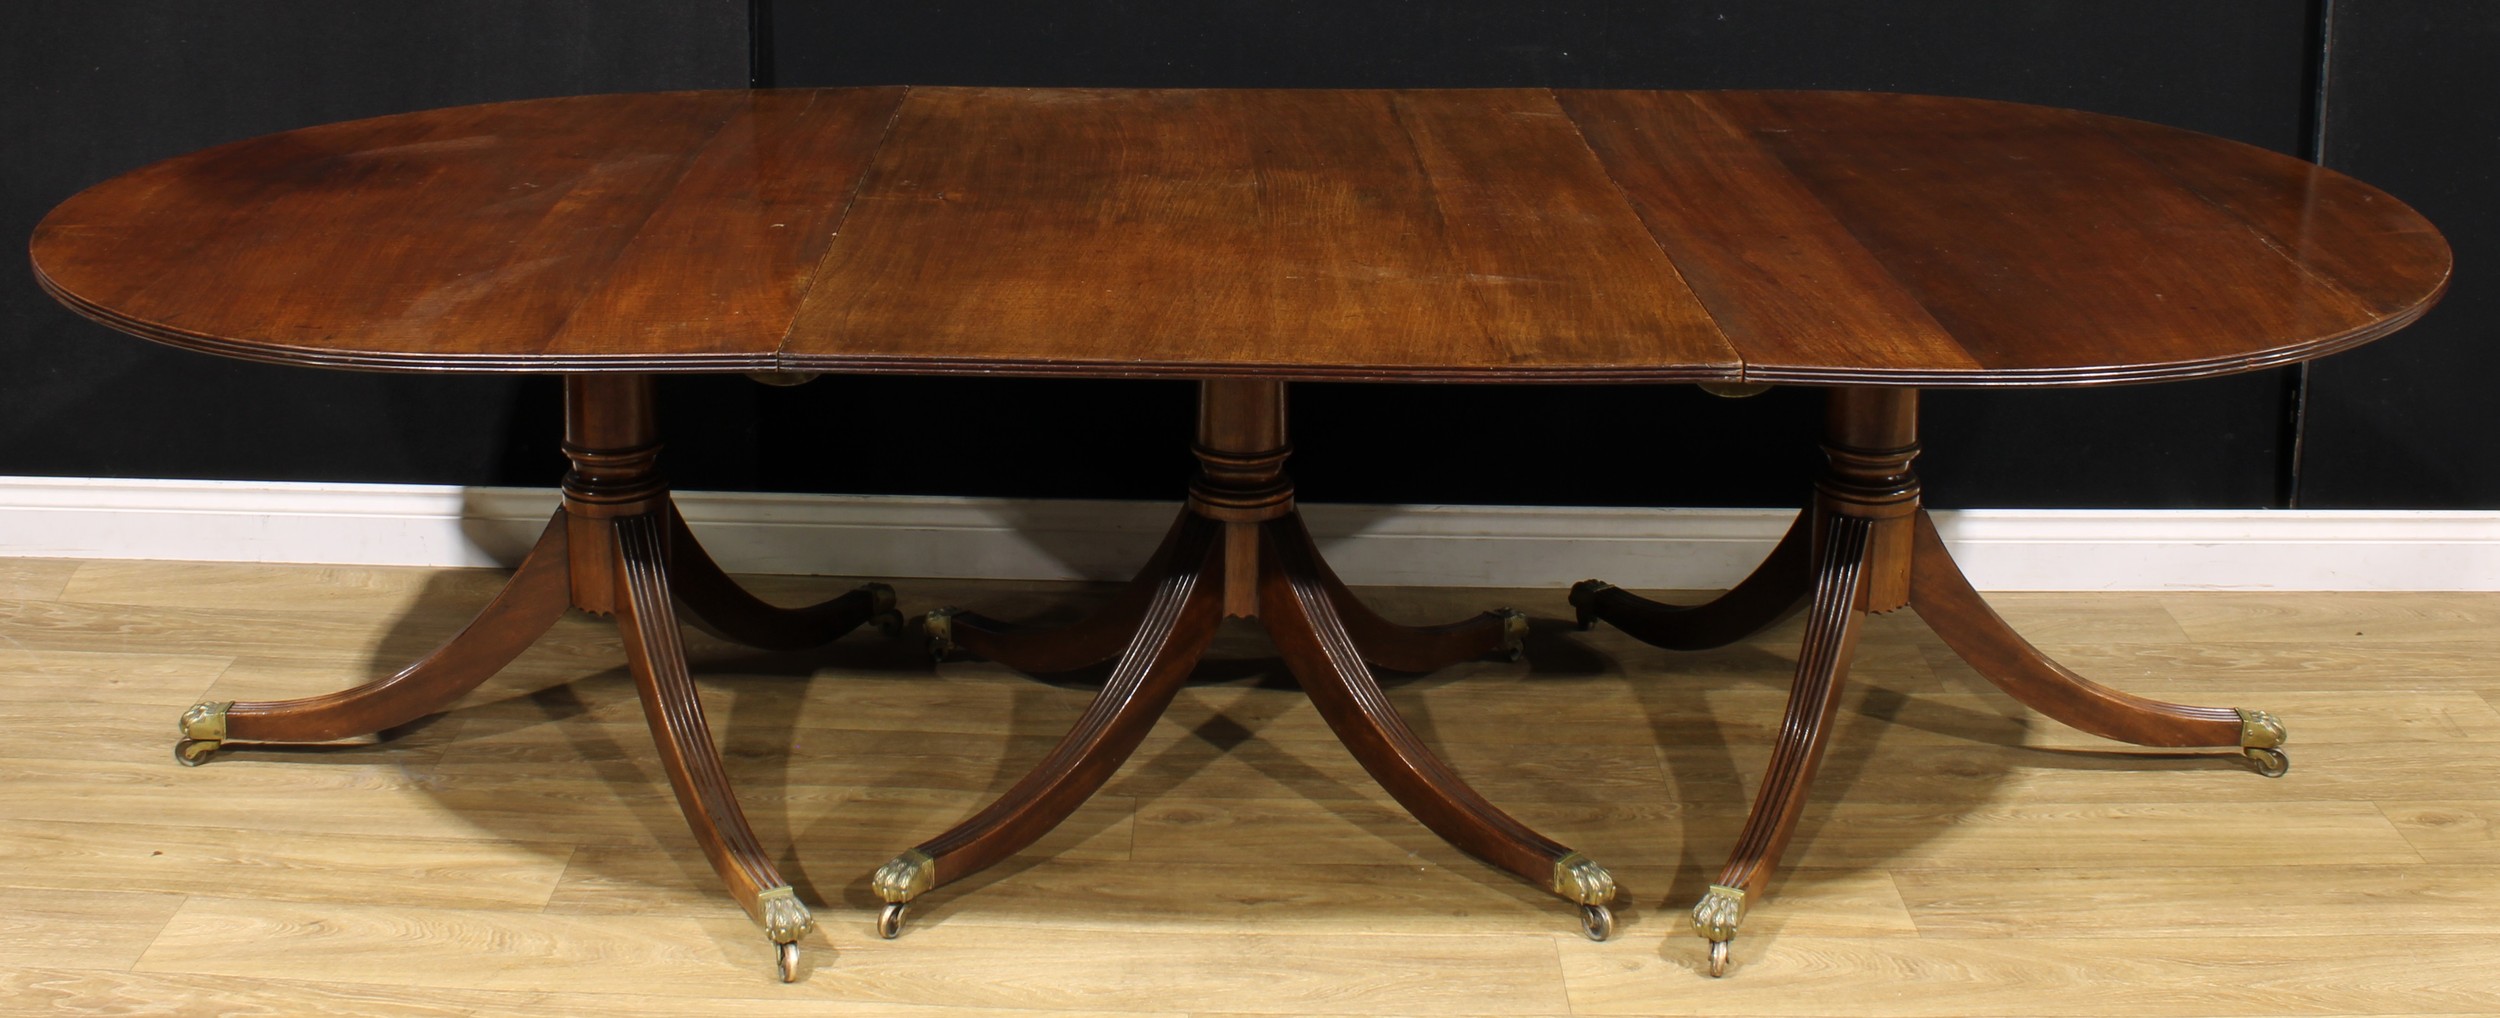 A large Regency Revival mahogany triple-pillar dining table, discorectangular top with reeded edge, - Image 2 of 3